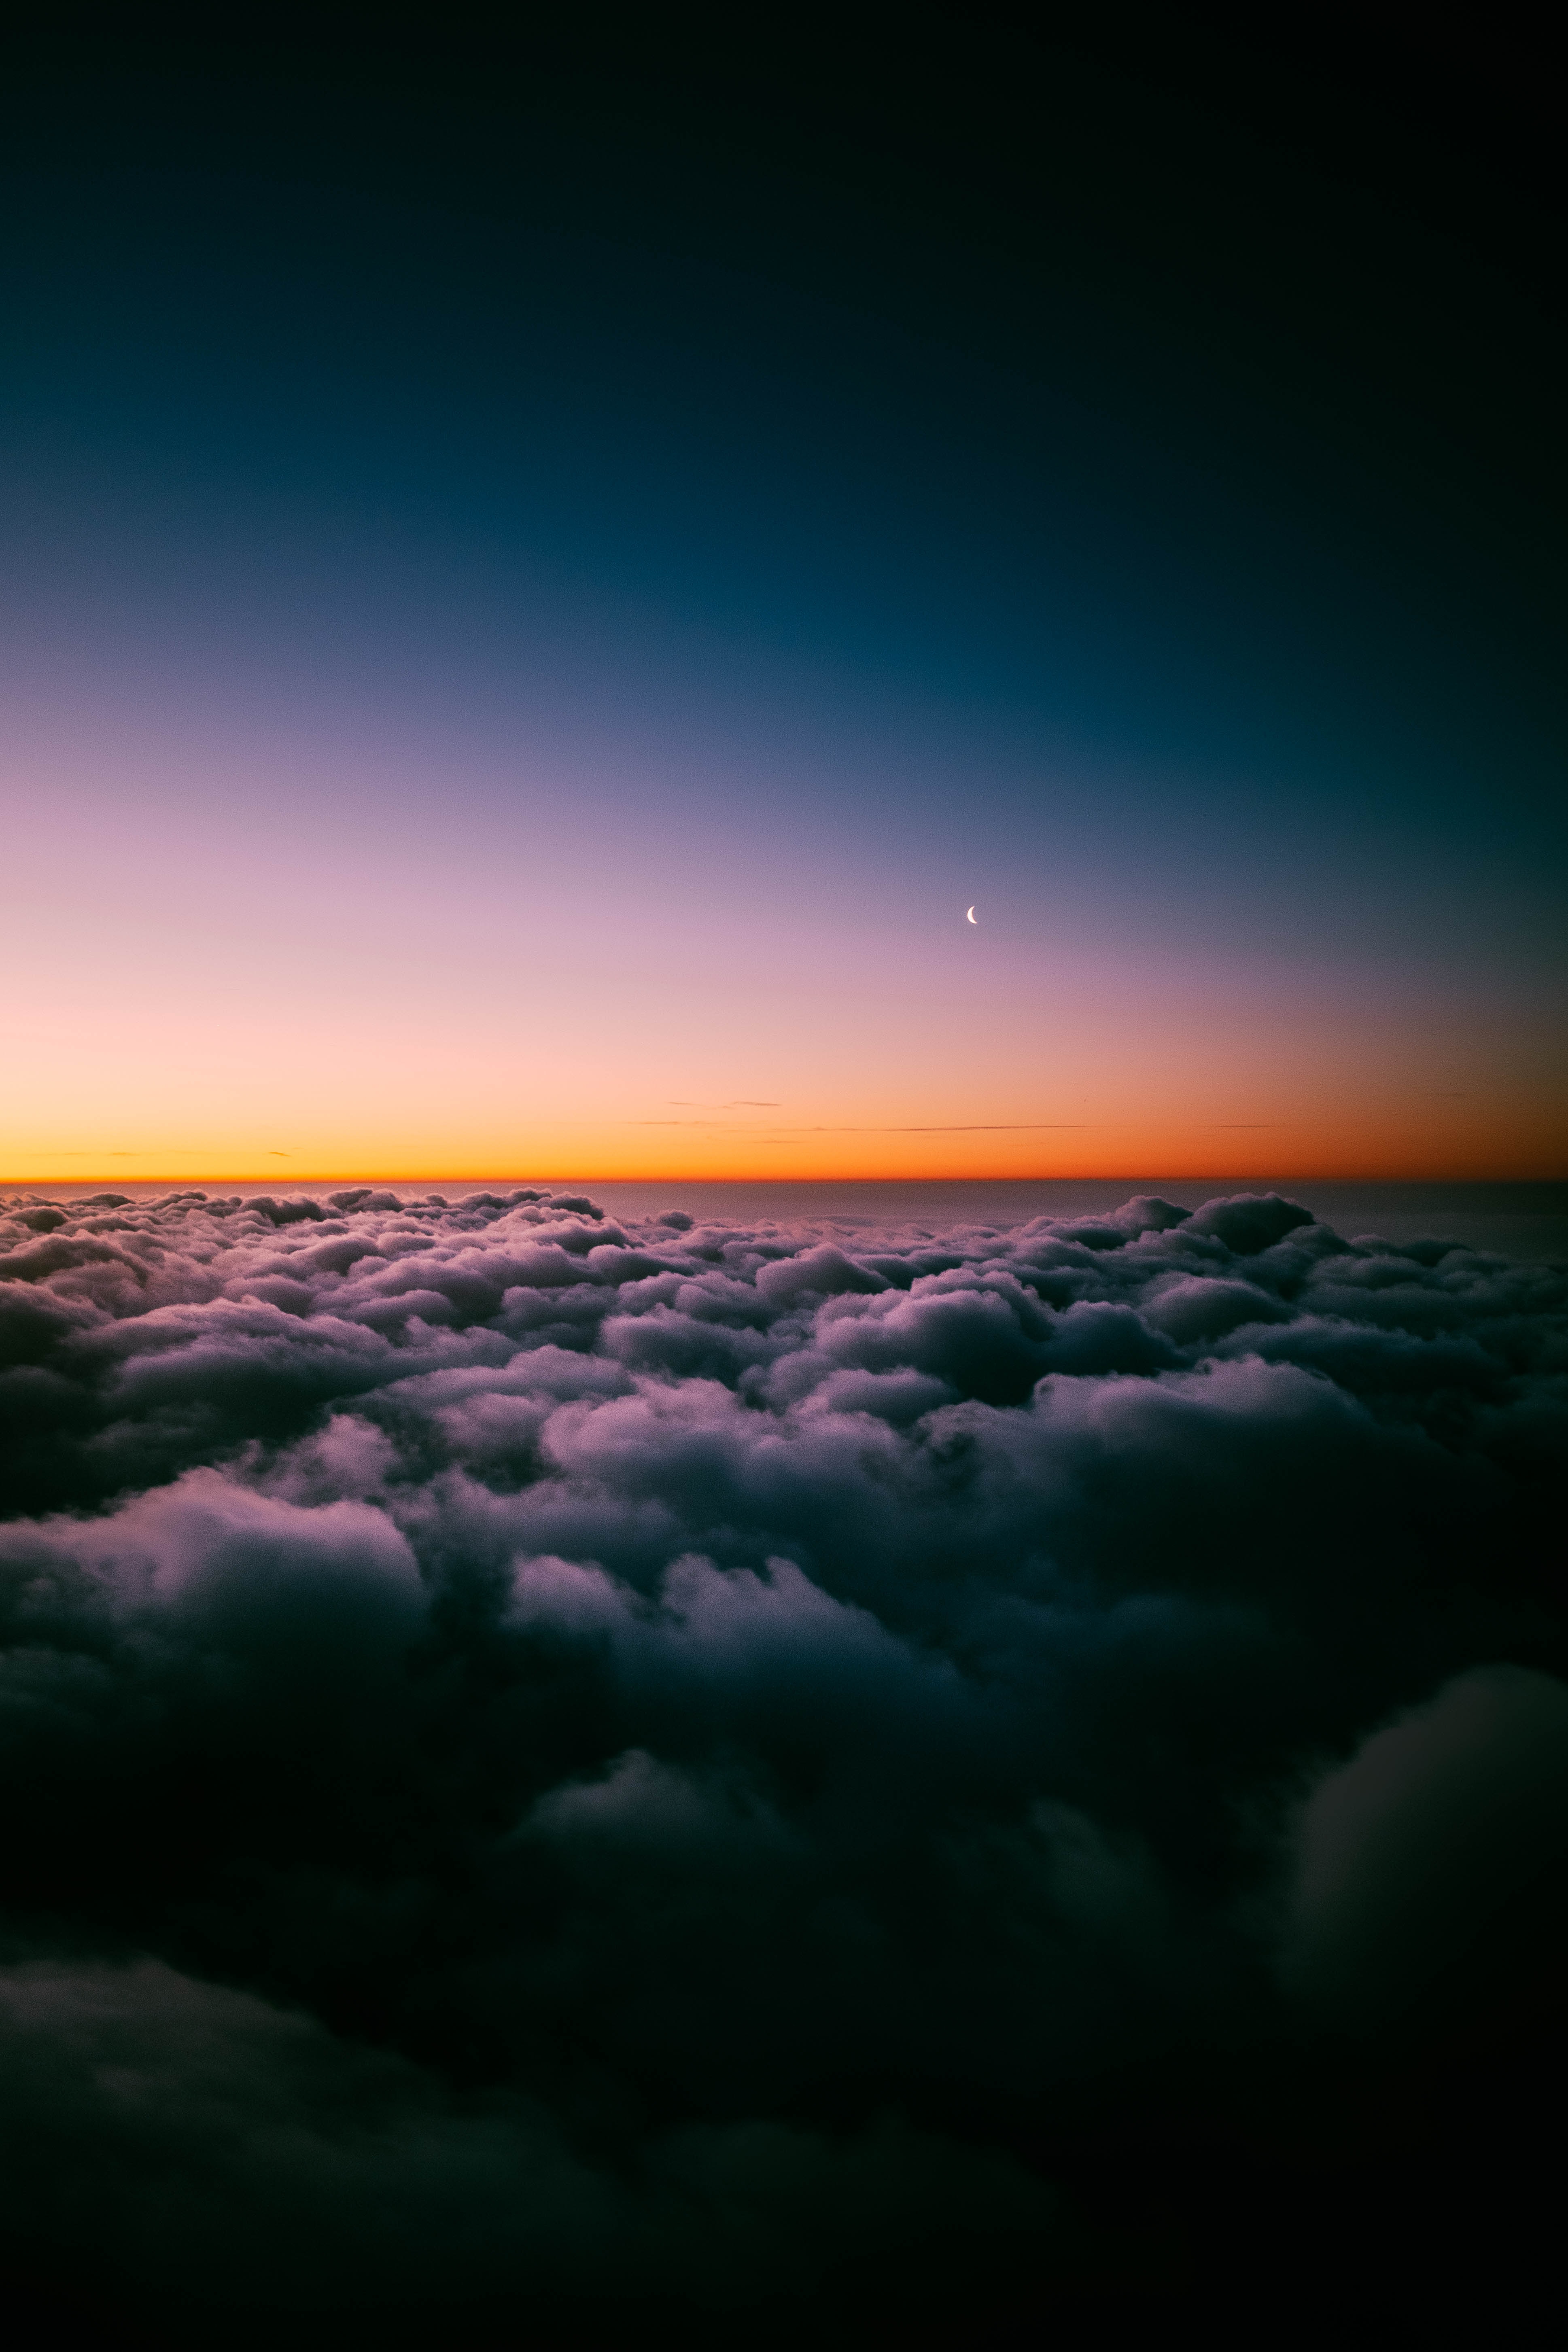 android clouds, porous, above the clouds, moon, nature, sunset, twilight, dusk, sky horizon